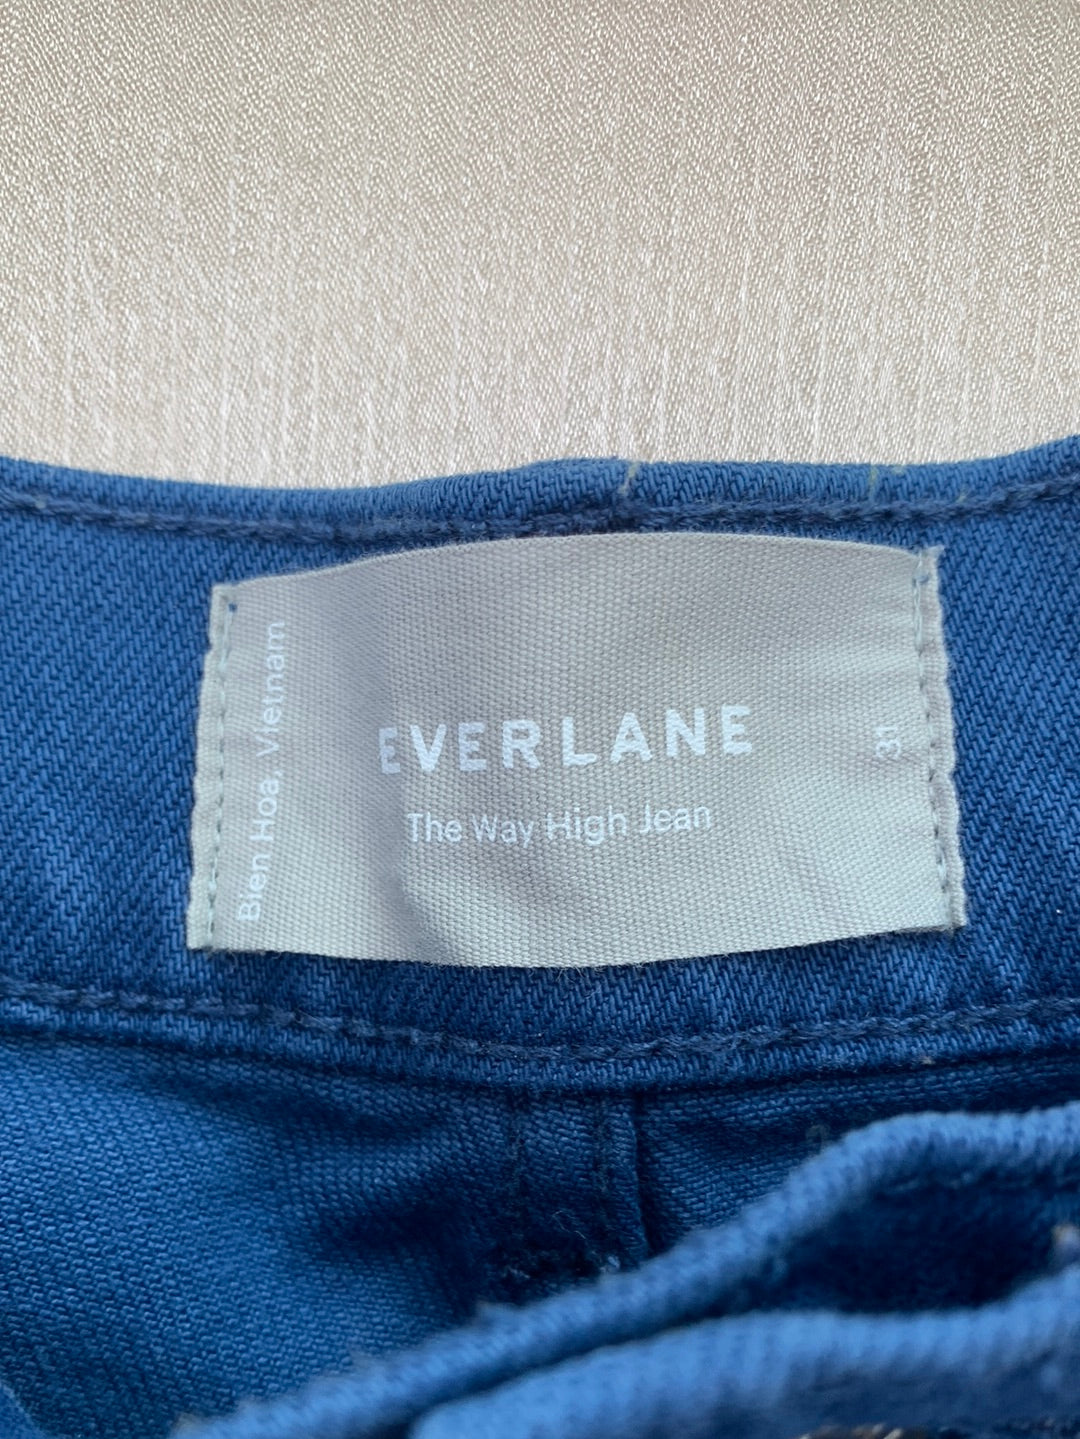 EVERLANE blue The Way High Jeans - 31